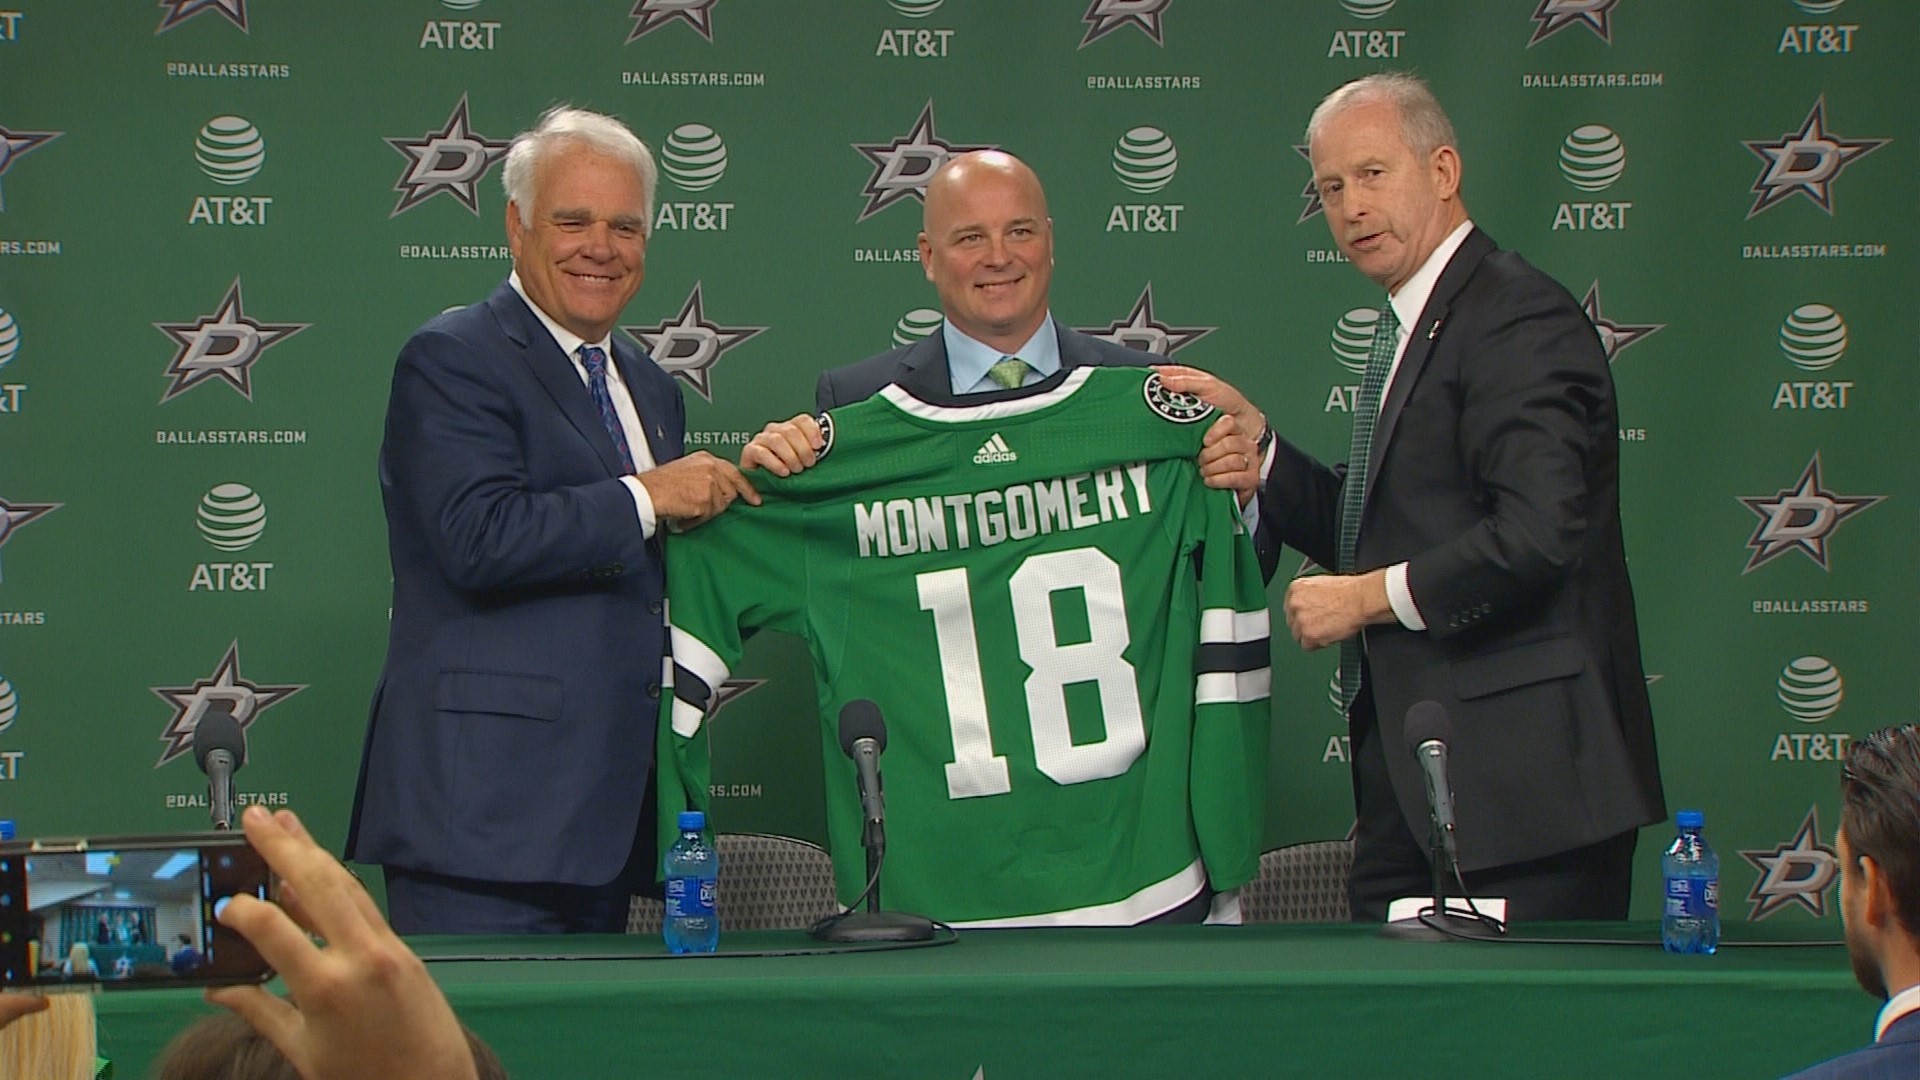 The Stars dismissed Jim Montgomery on Tuesday. Rick Bowness has been made the interim head coach.